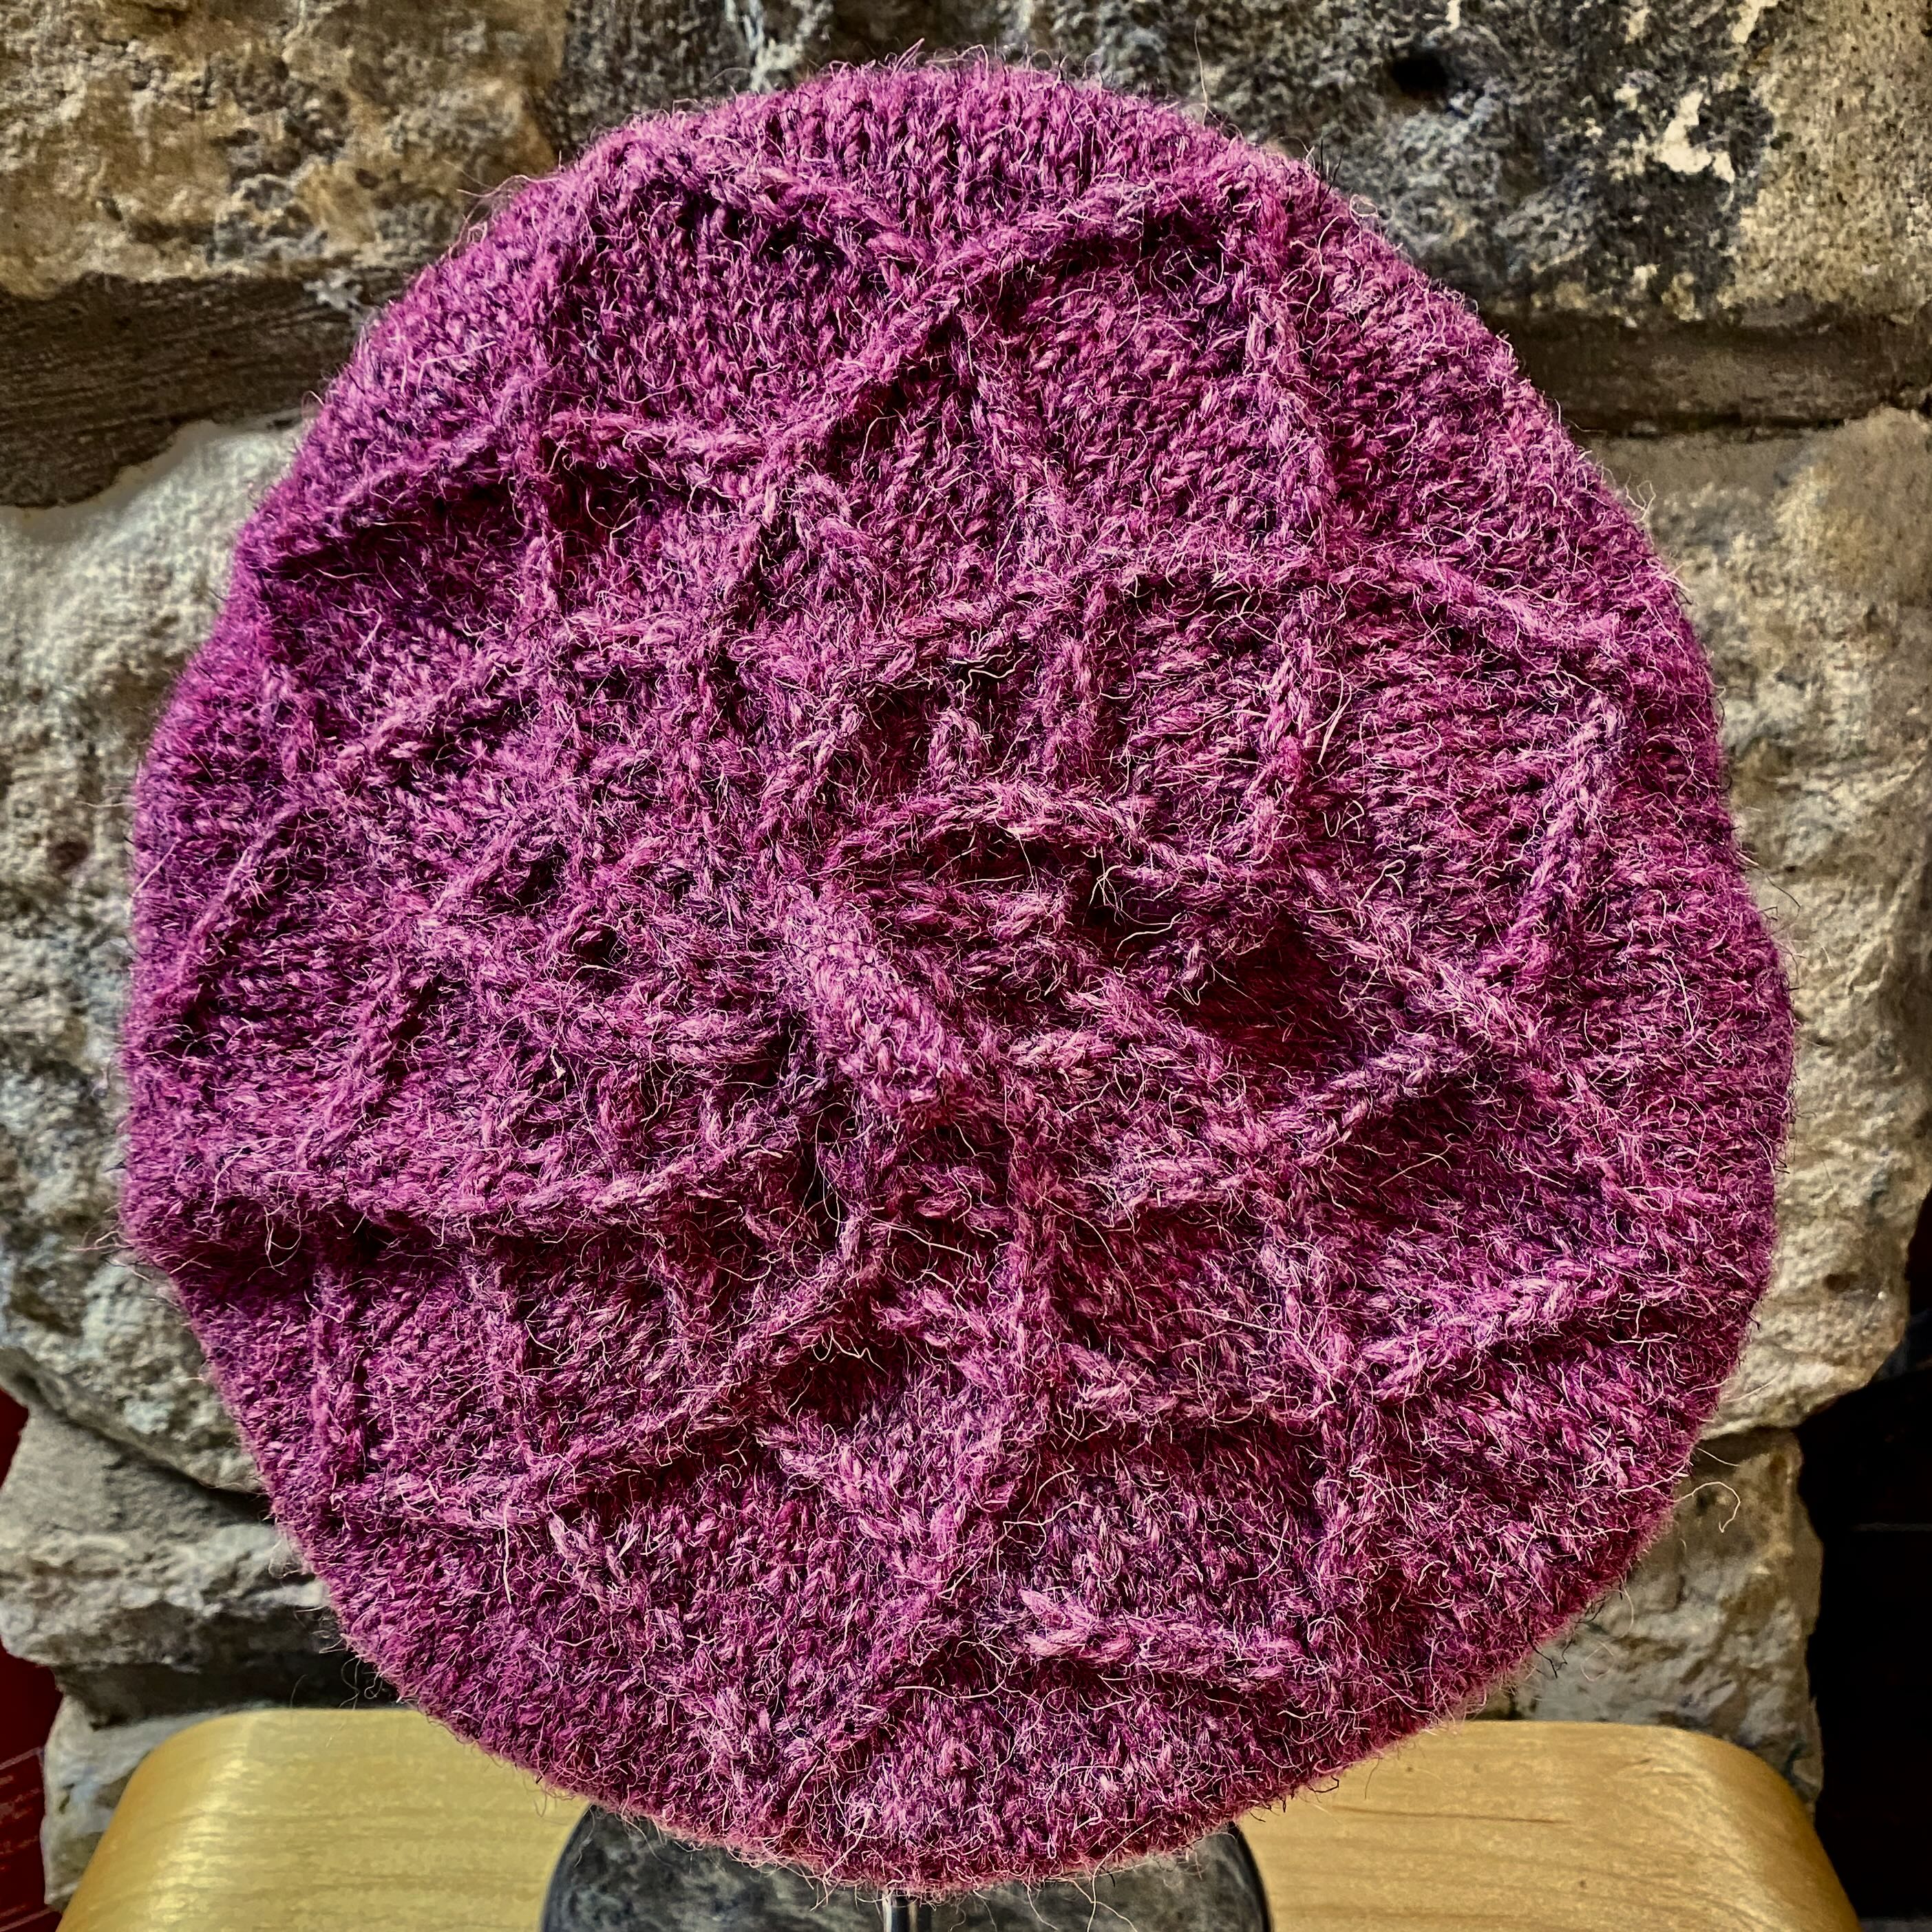 Handknitted 'Cathedral Window' Beret